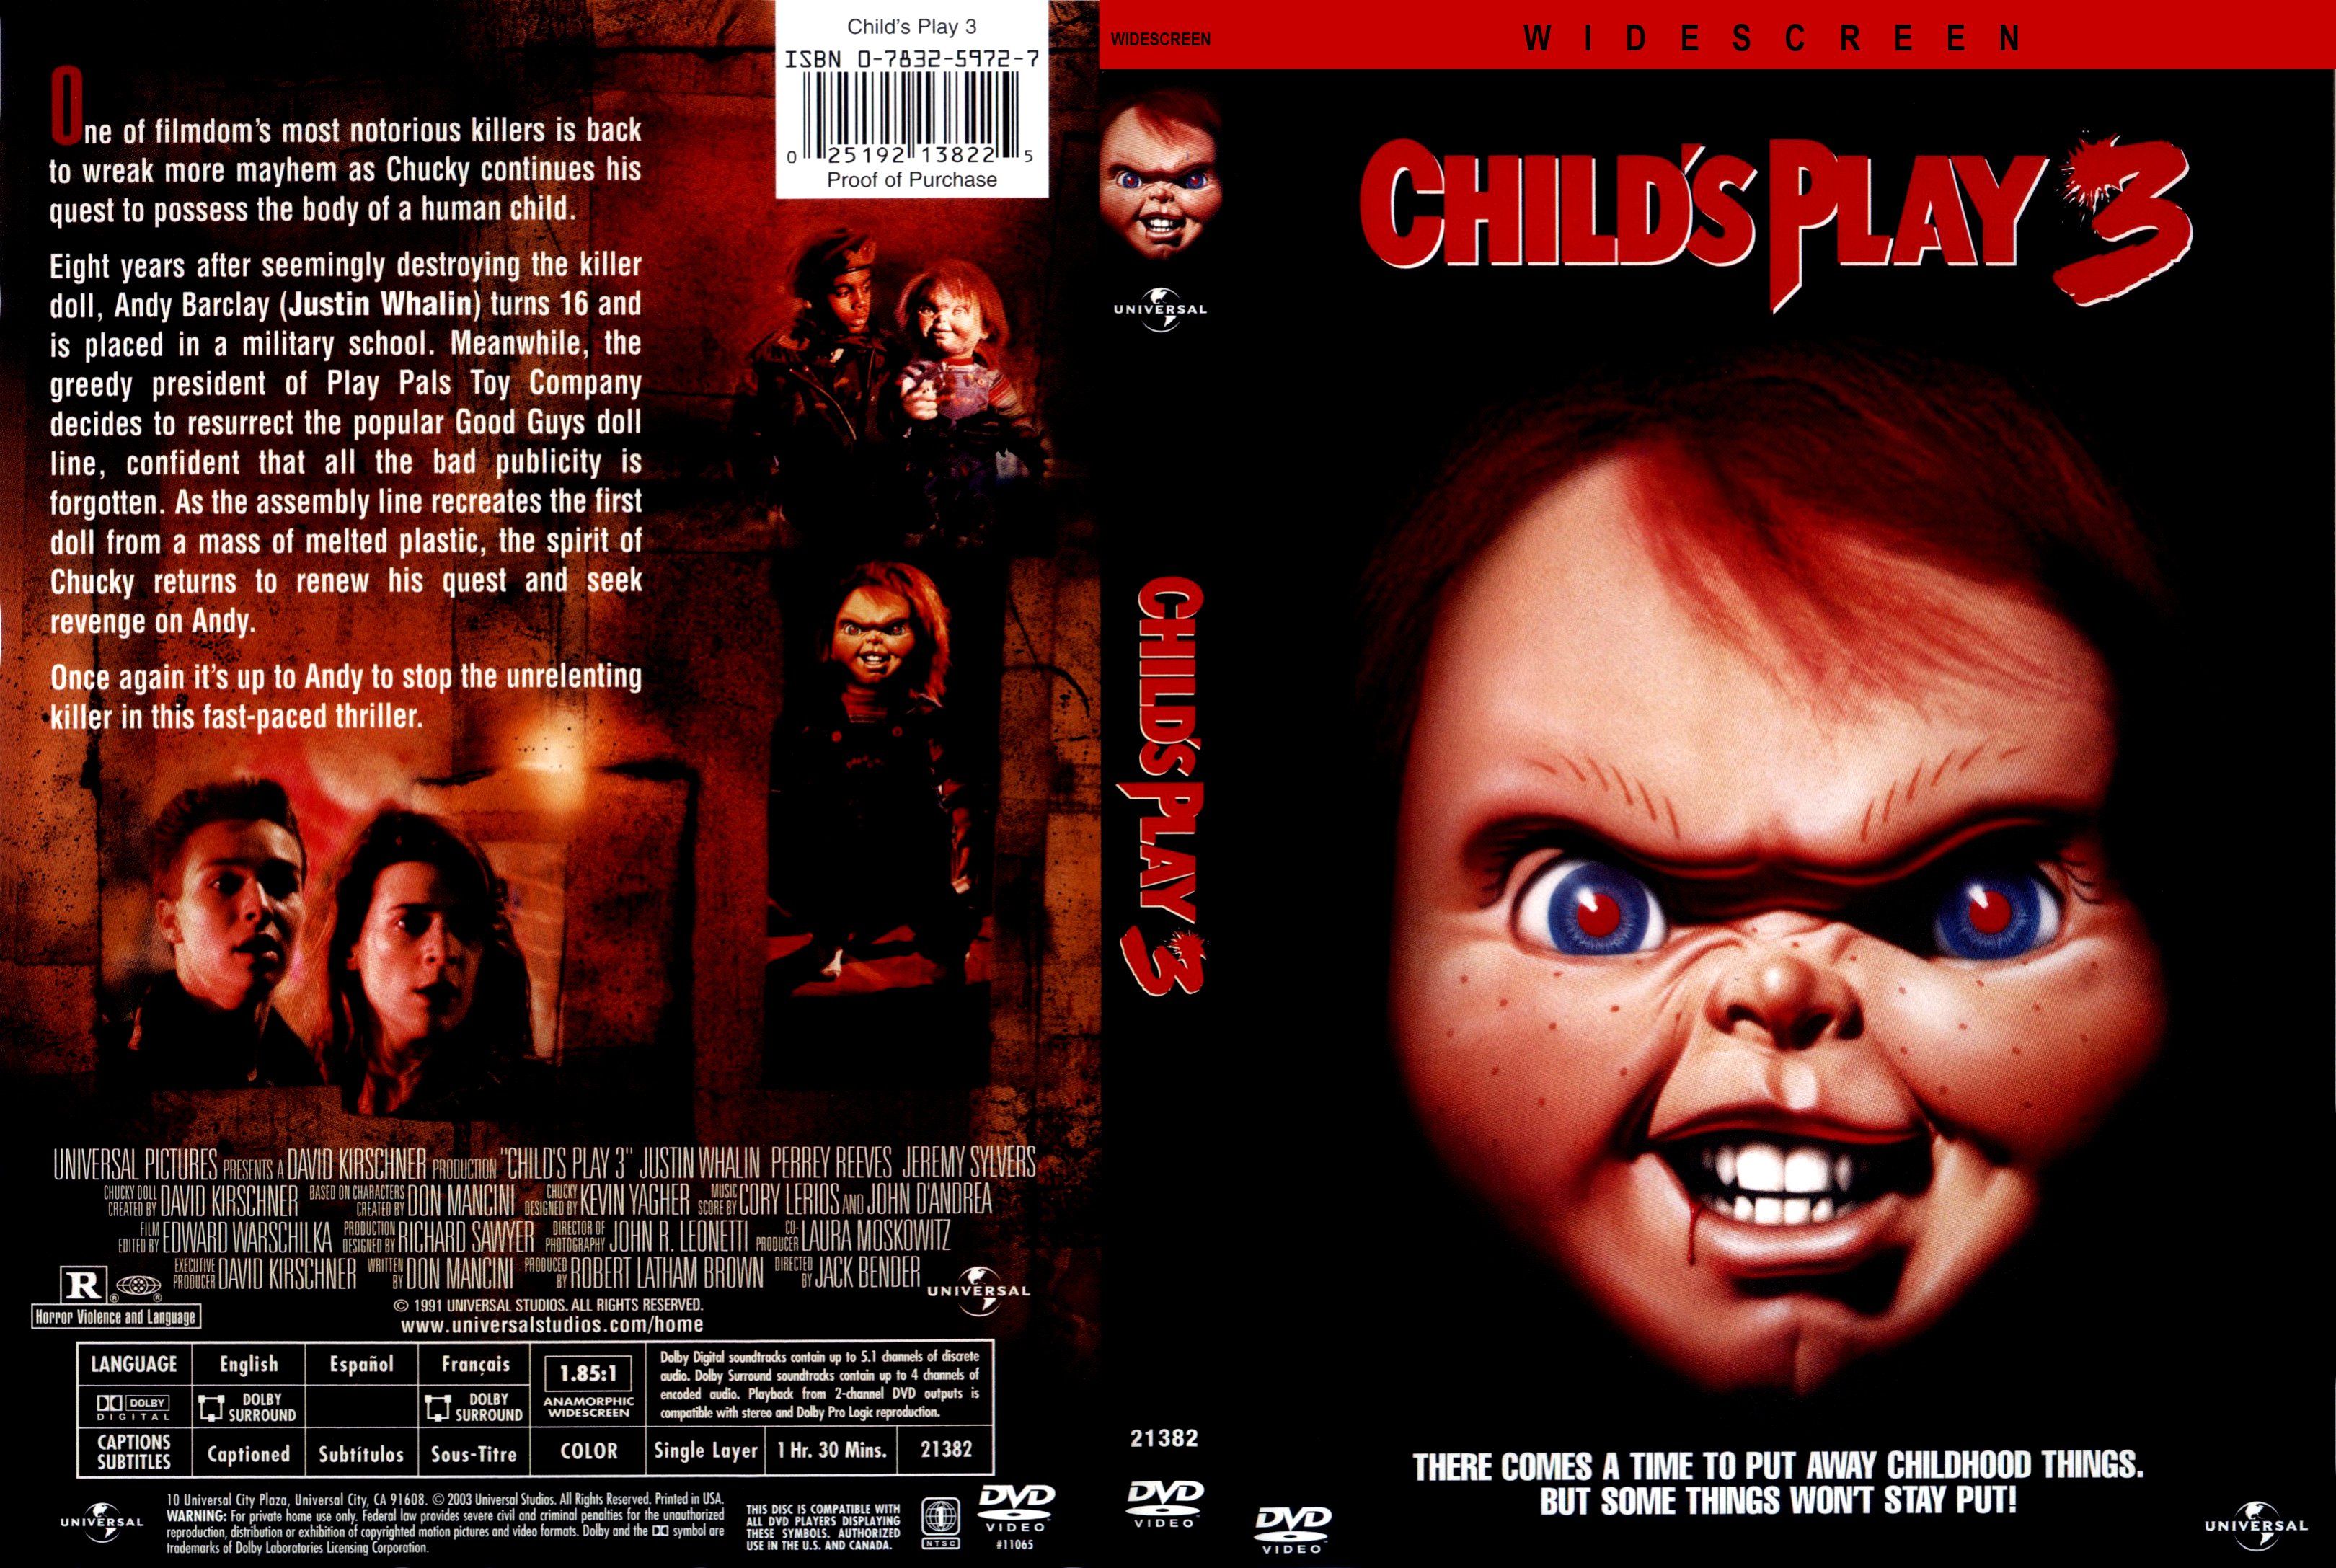 High Resolution Wallpaper | Child's Play 3 3240x2175 px